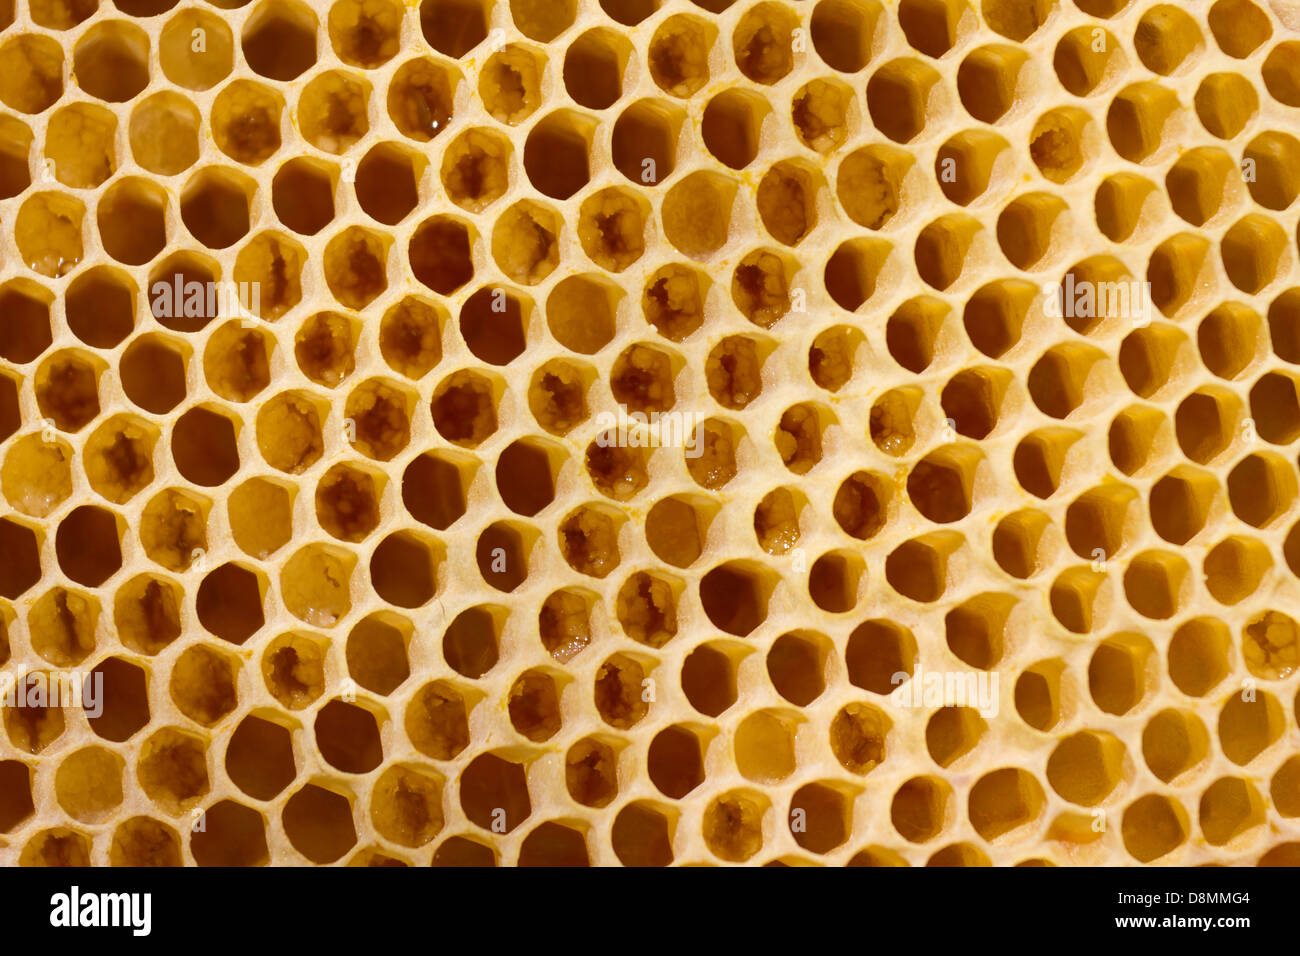 Honeycomb cells close-up with honey Stock Photo